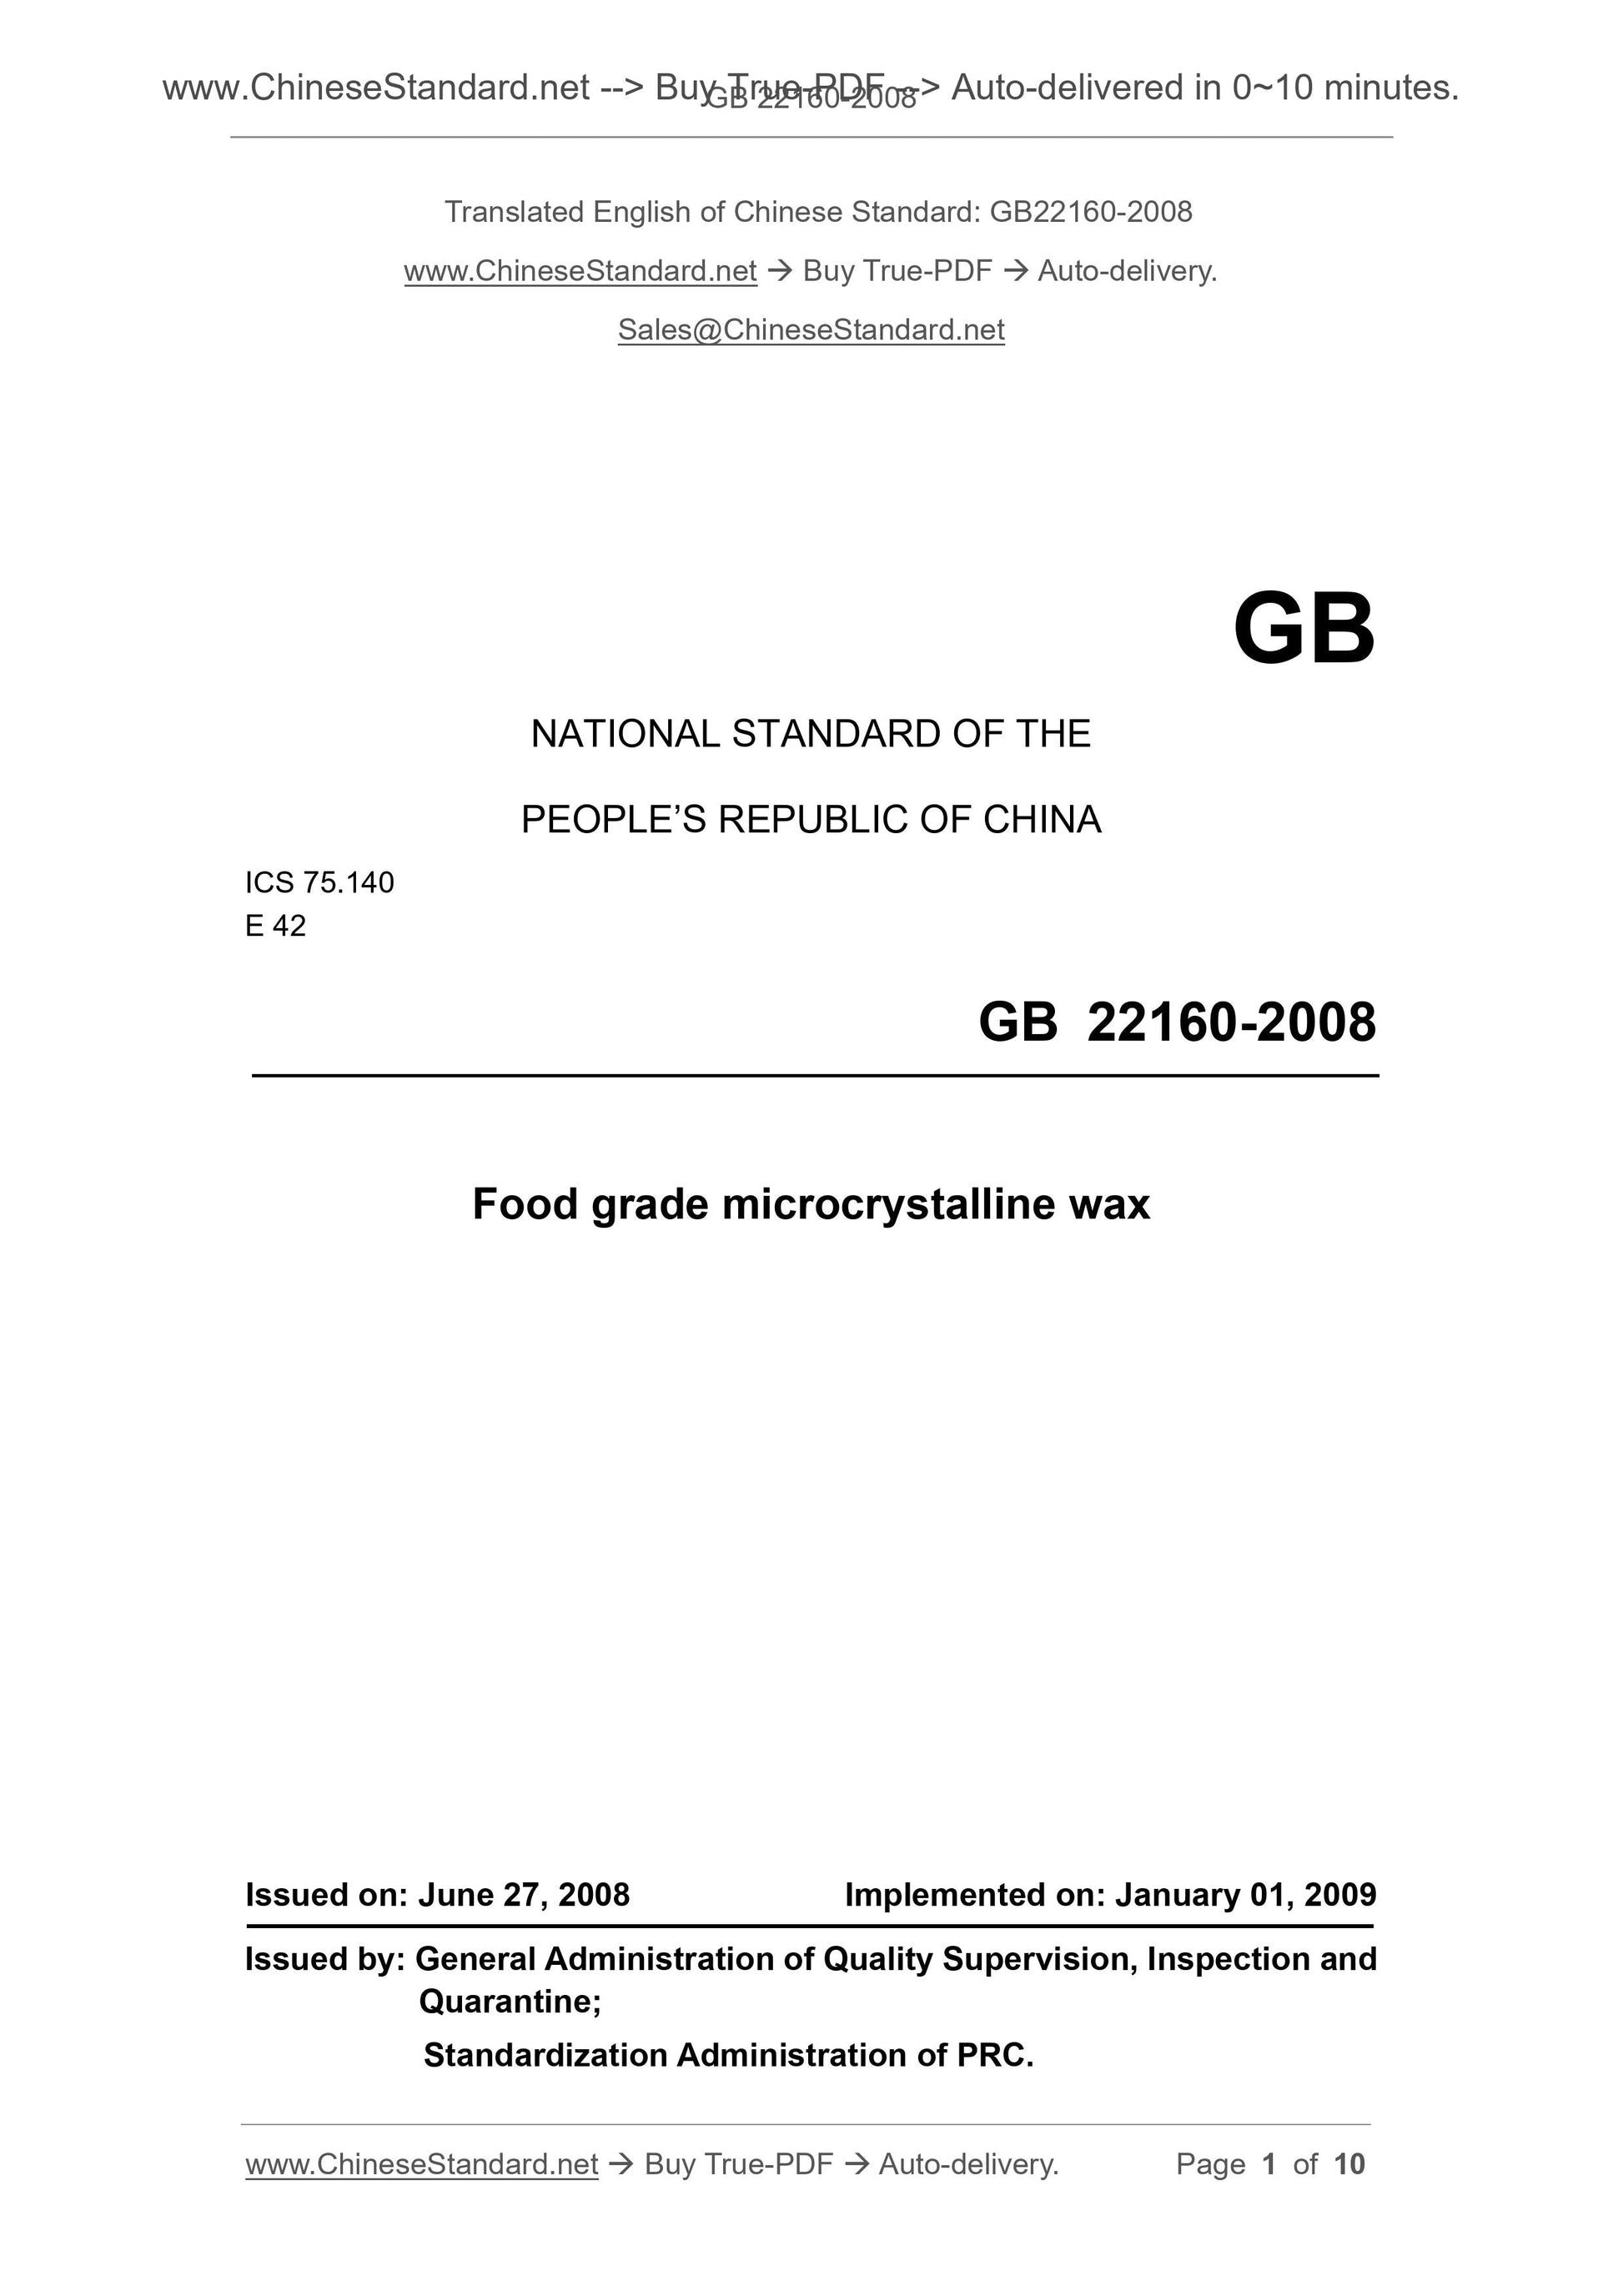 GB 22160-2008 Page 1